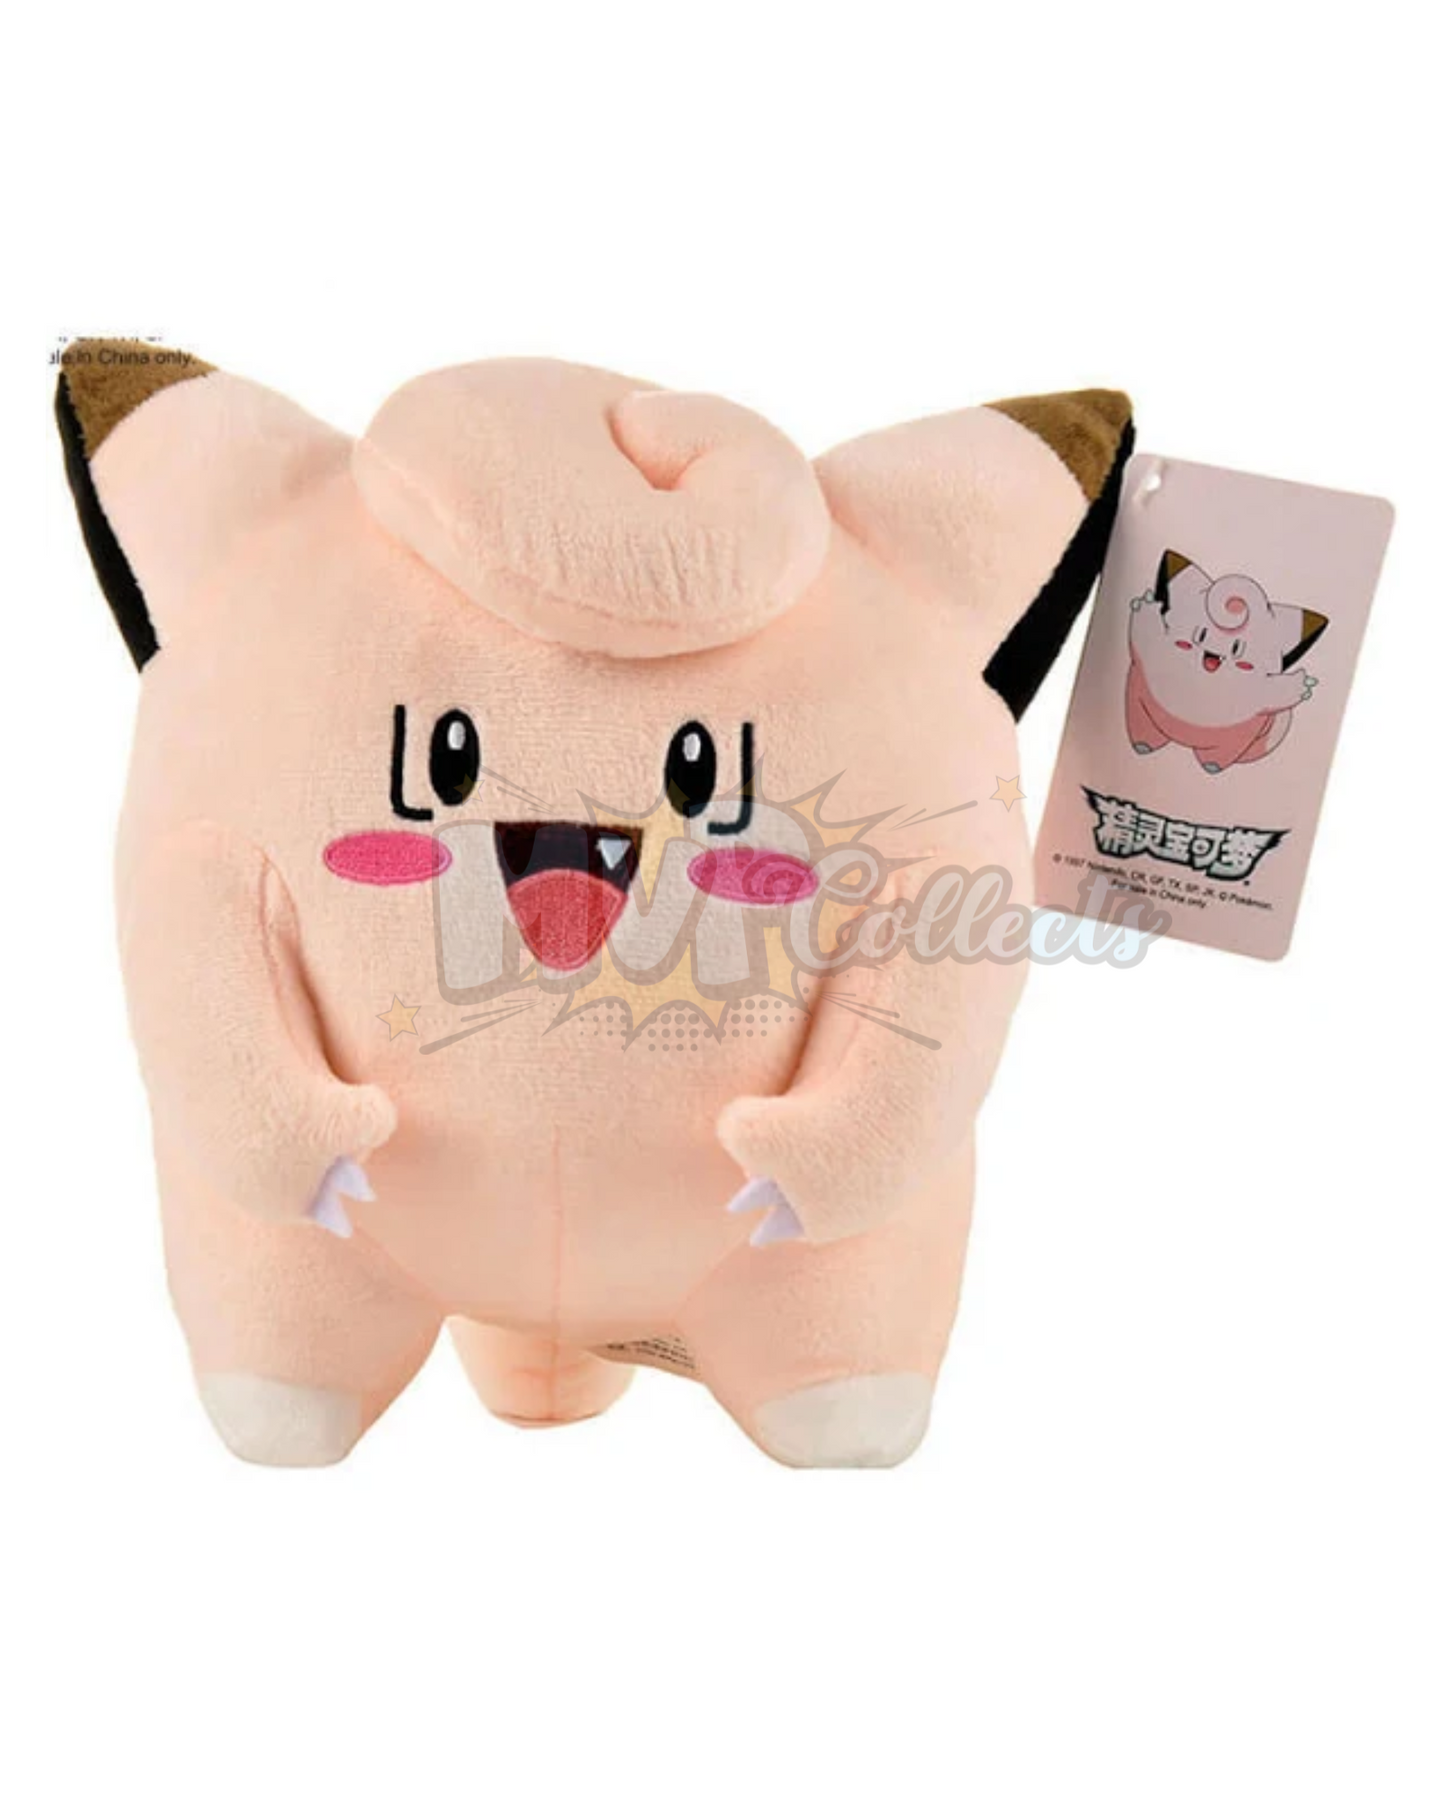 Pokemon Cute Clefairy Stuffed Doll Anime Figures Plush Toy for Children Gifts